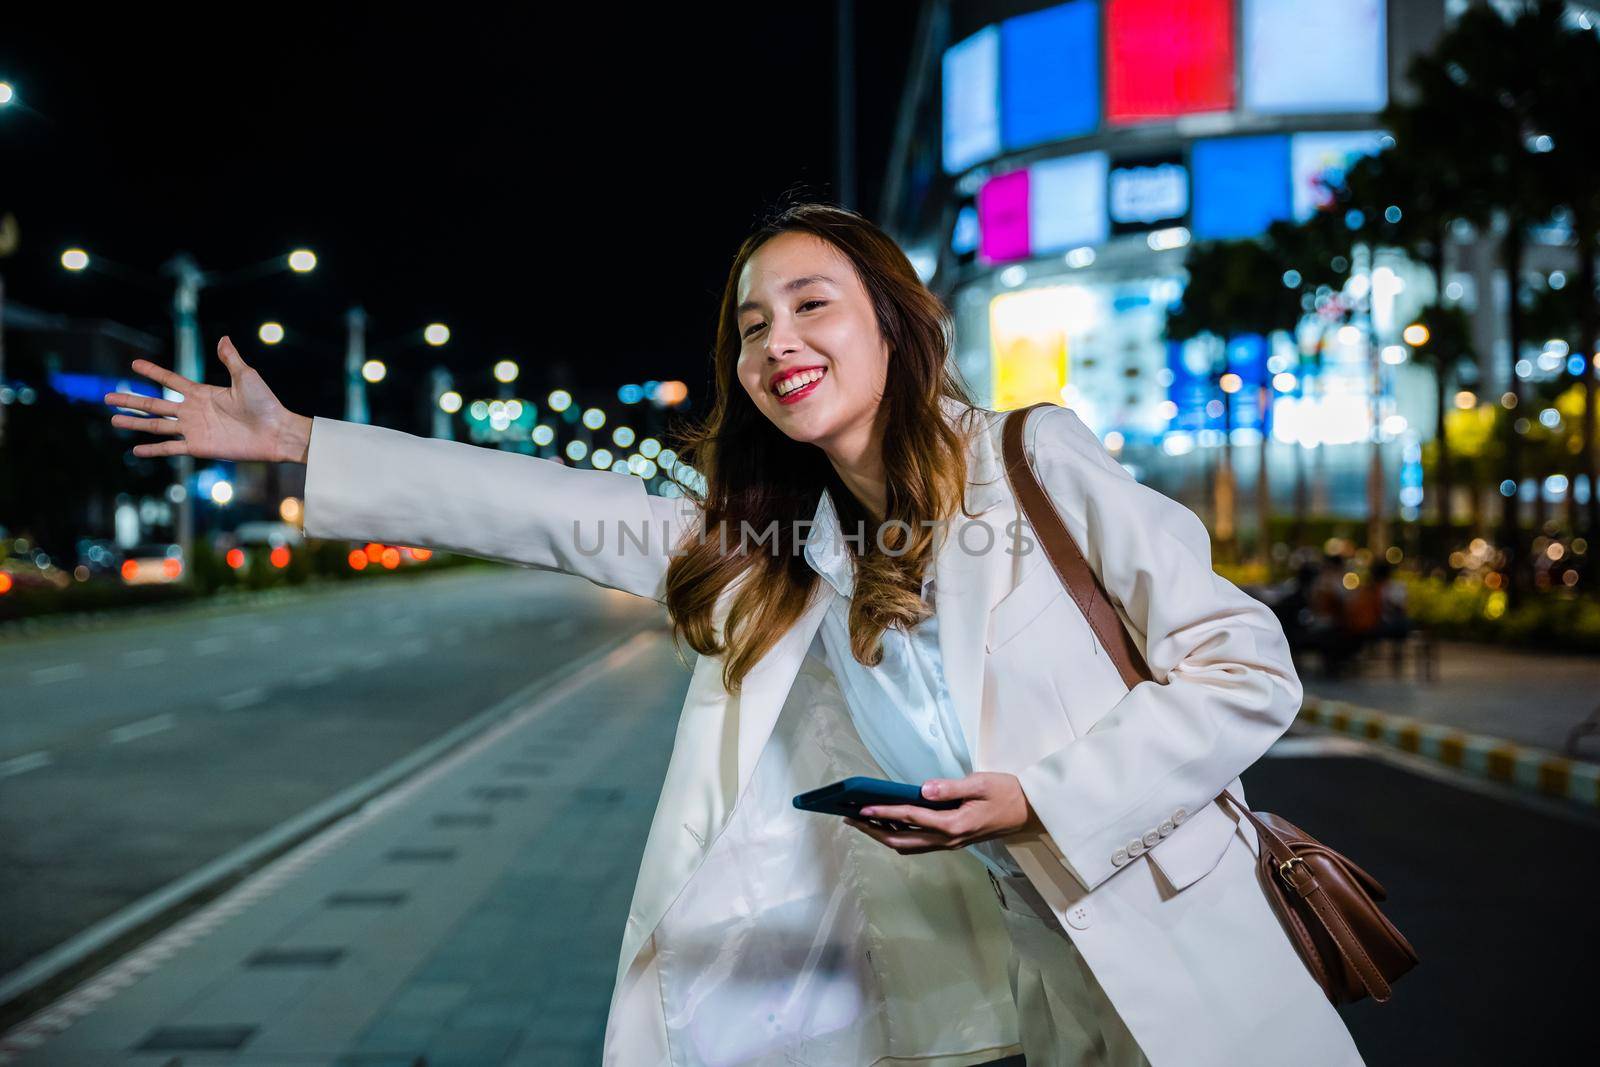 Asian business woman walking to hail waving hand taxi on road in city street at night, Beautiful woman smiling using smartphone application hailing with hand up calling cab outdoor after late work